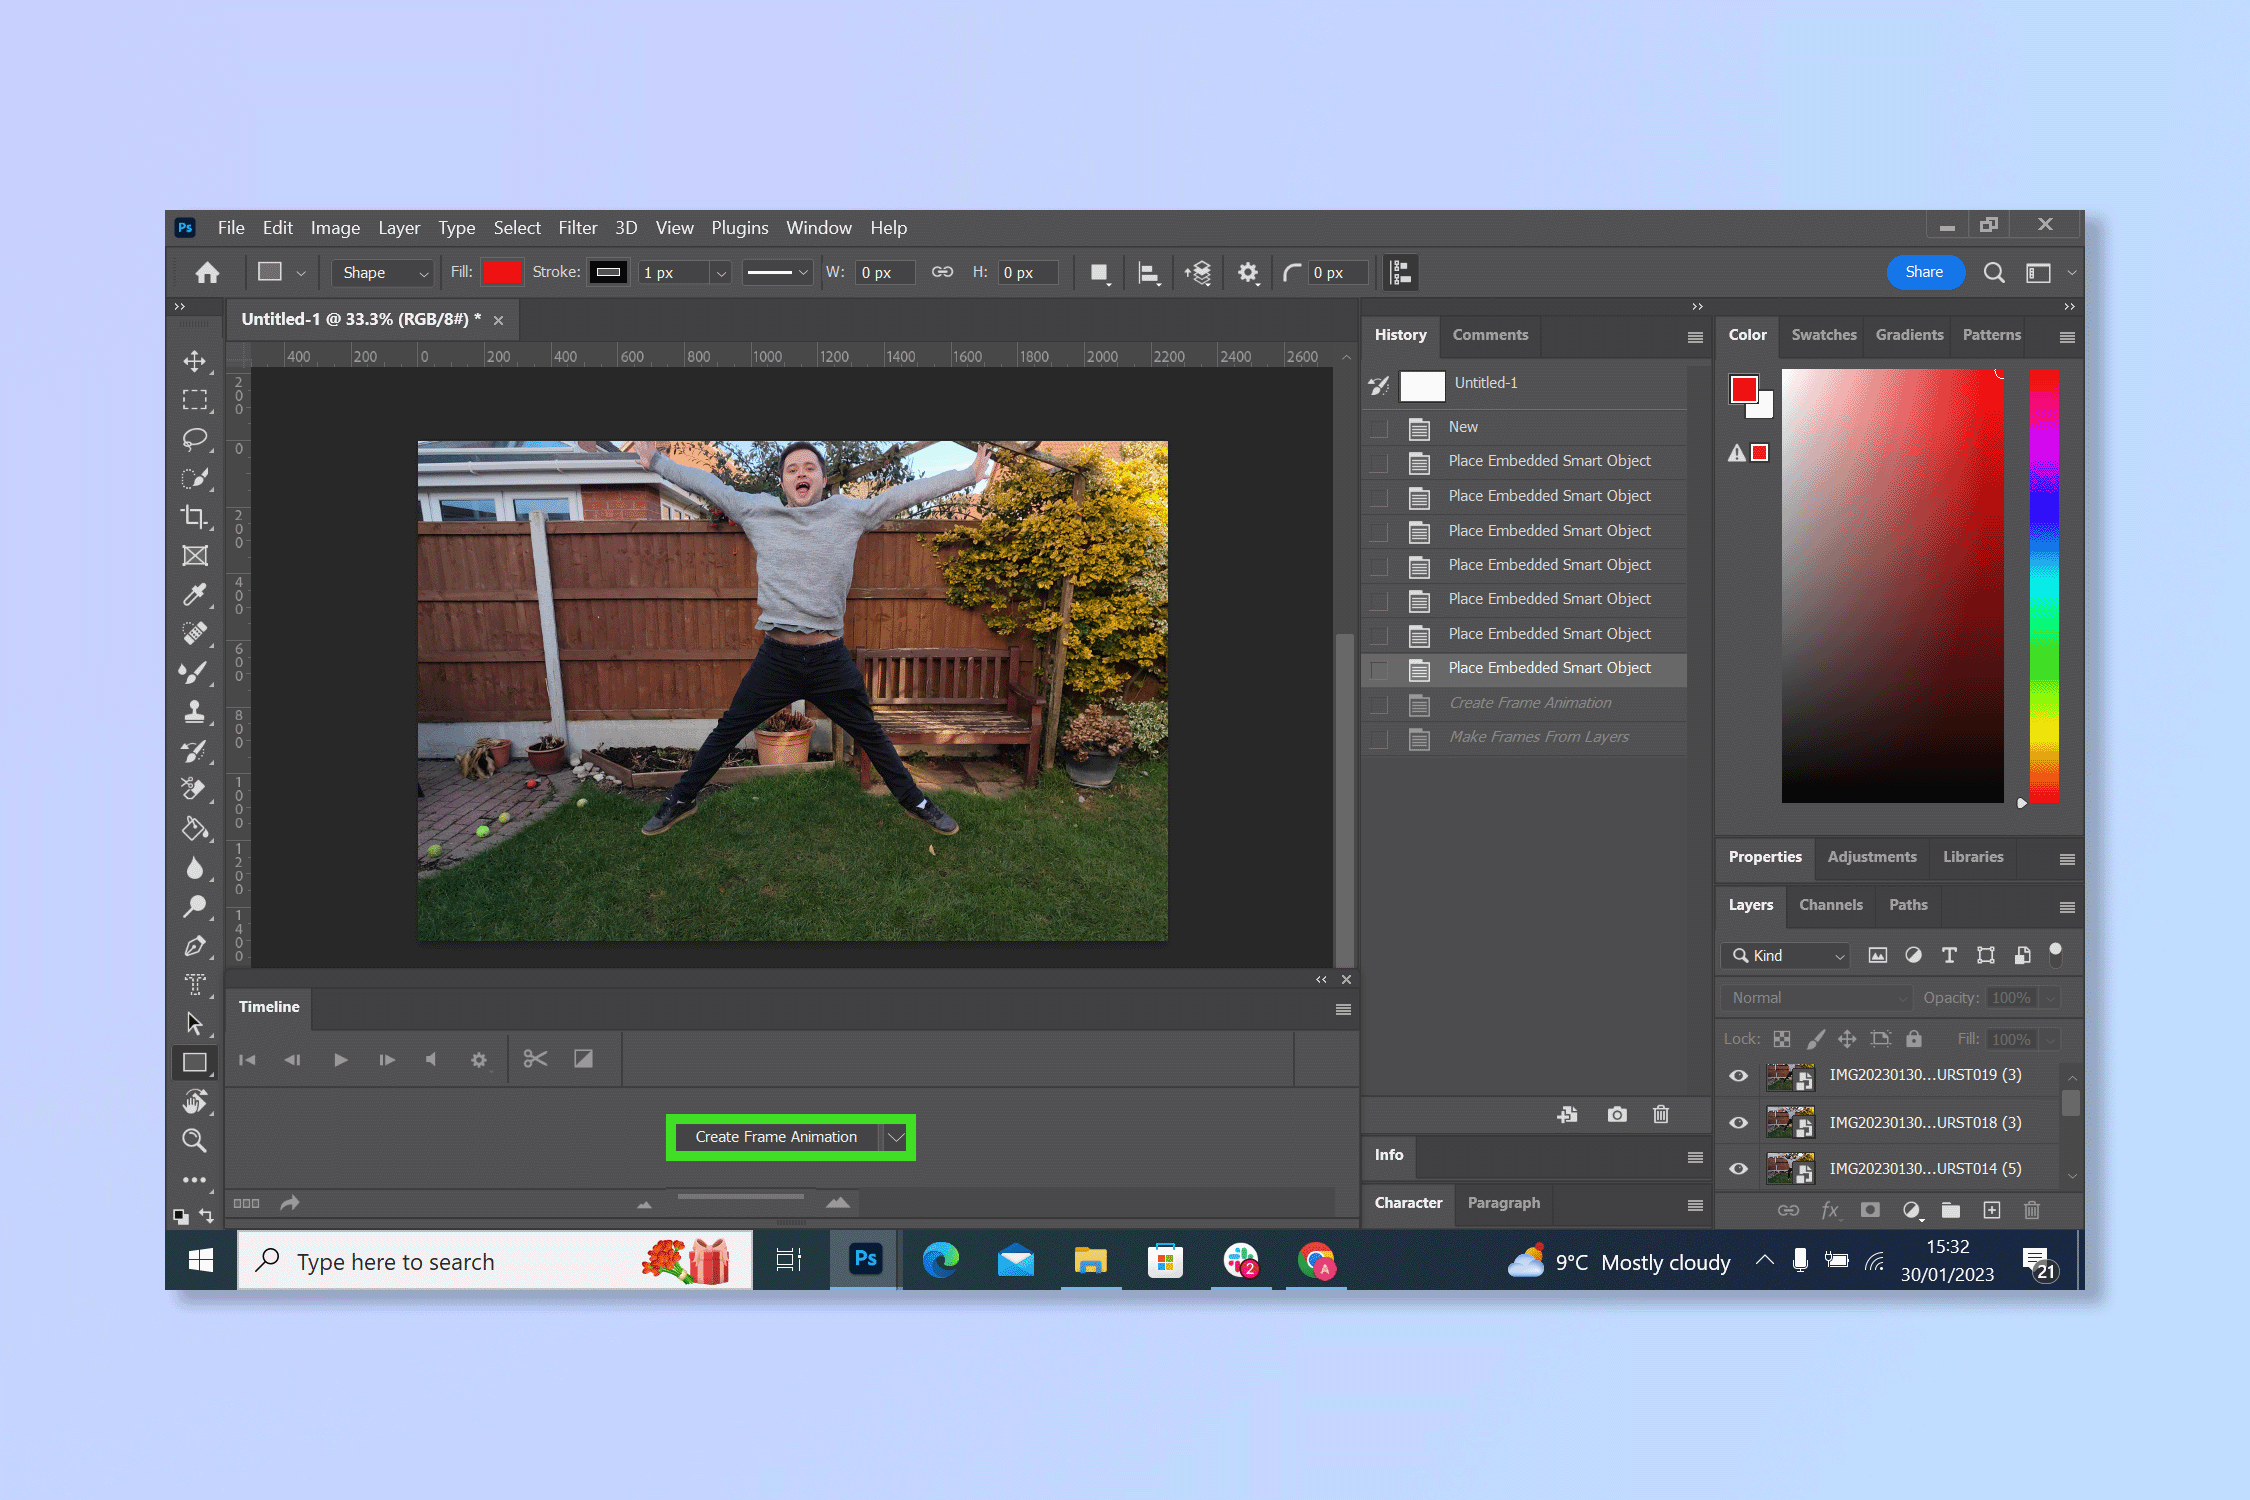 The third step to creating a Gif on Photoshop